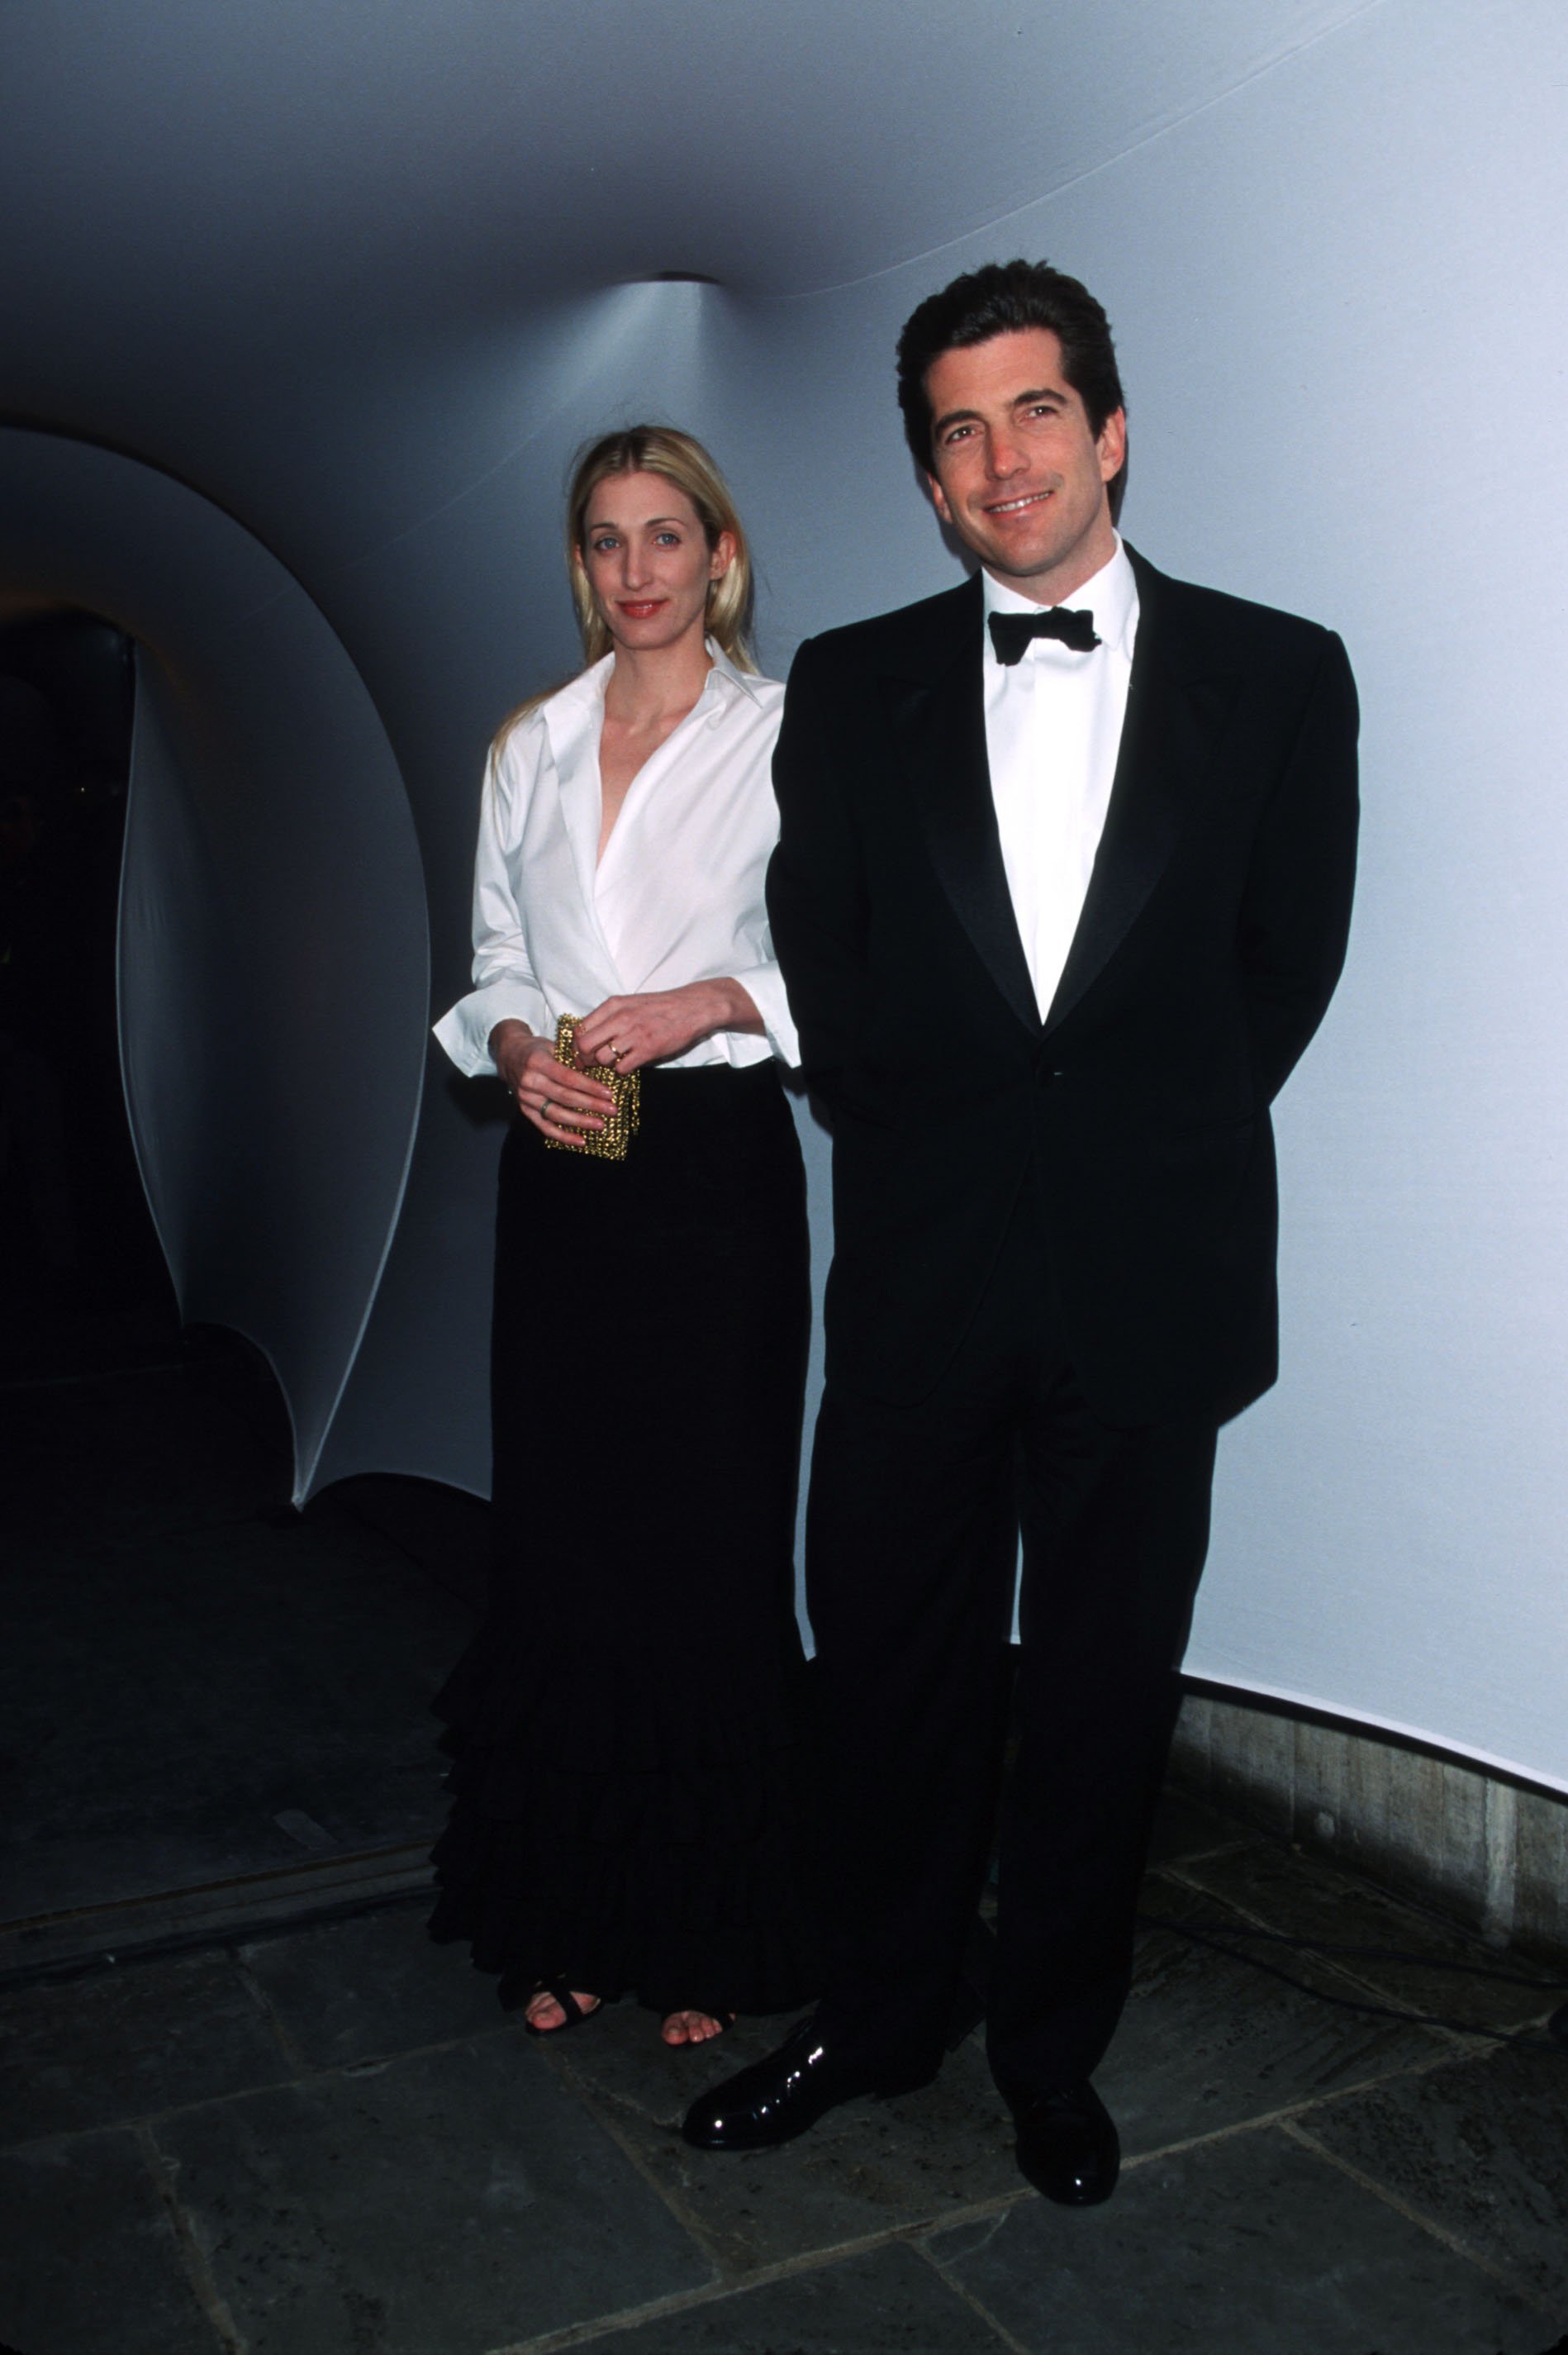 John F. Kennedy, Jr. and his wife Carolyn Bessette pose for a picture at the Annual Fundraising Gala on March 9, 1999, in New York City. | Source: Getty Images.